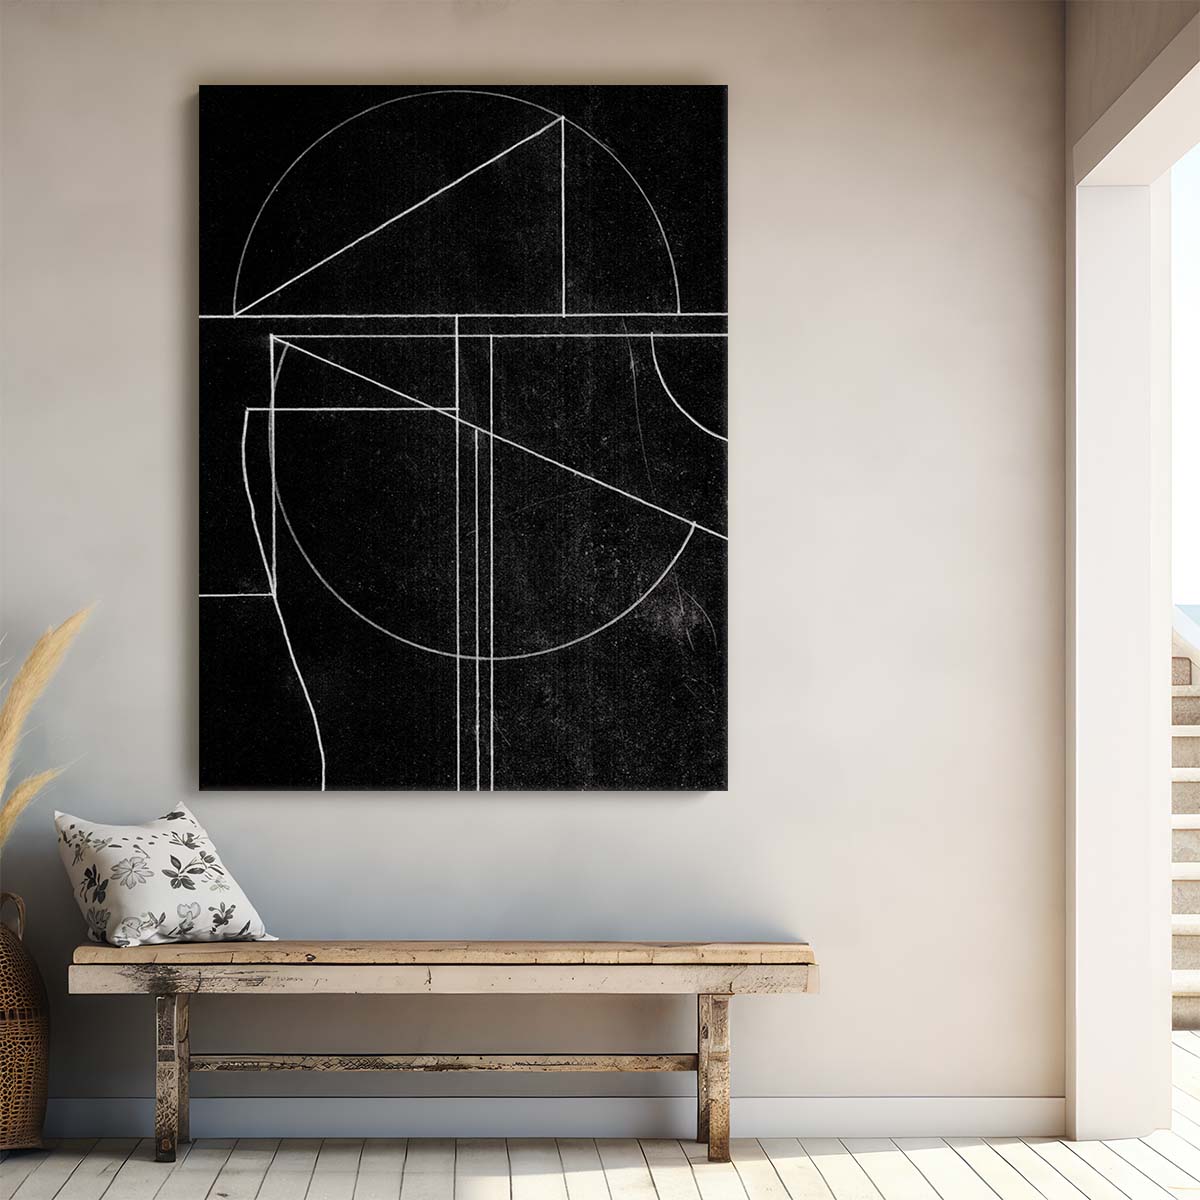 Modern Monochrome Abstract Illustration Art by Dan Hobday by Luxuriance Designs, made in USA